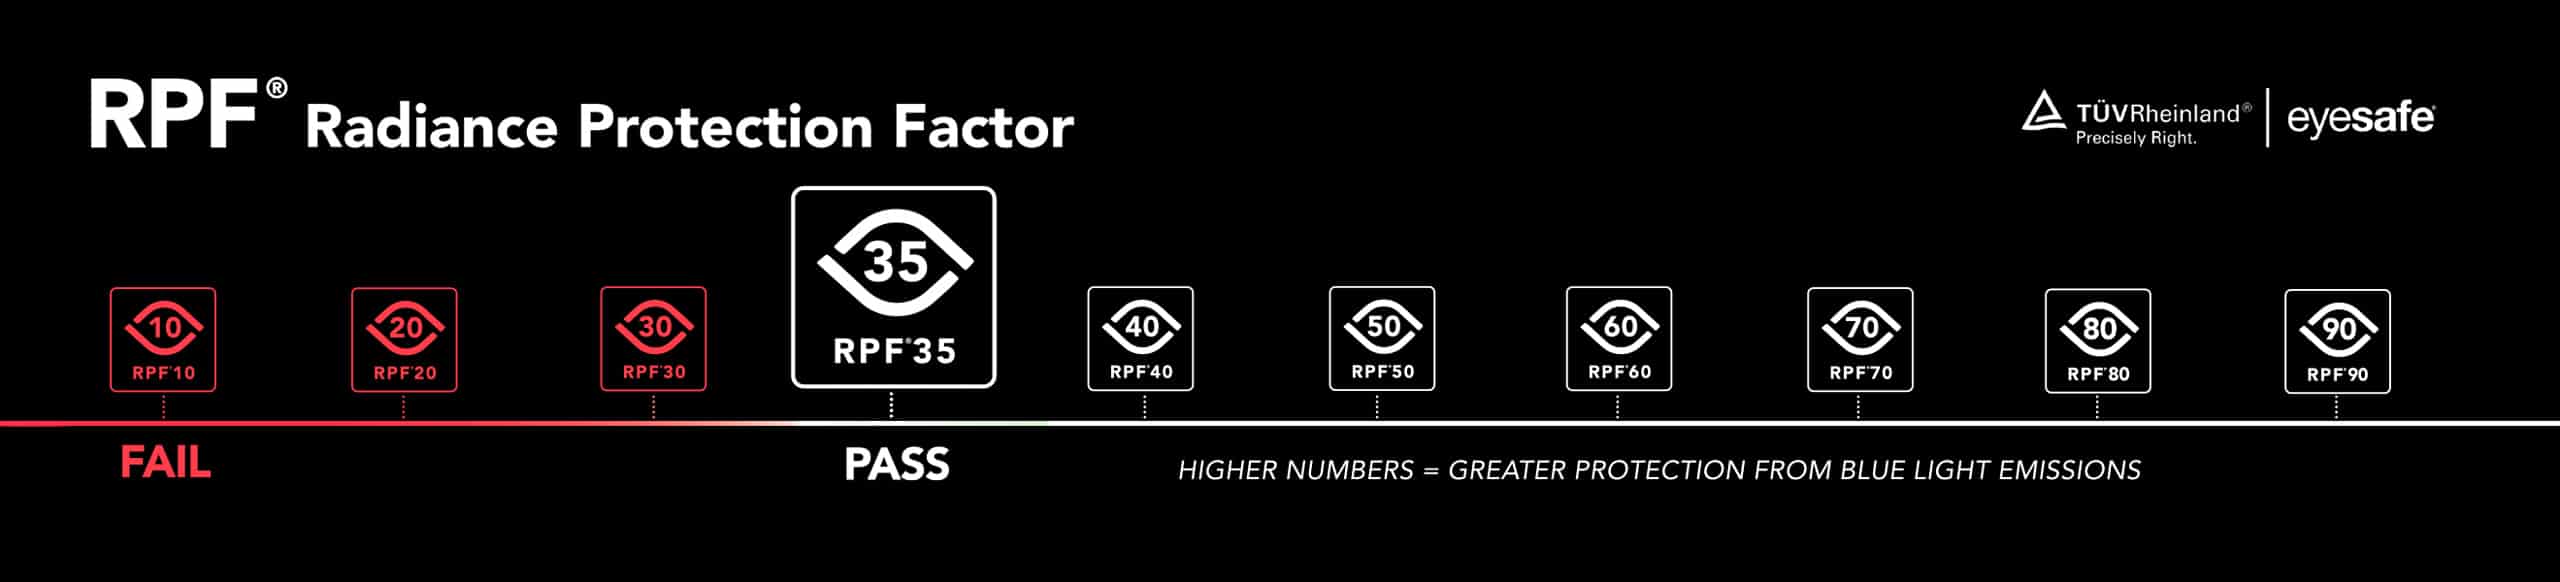 RPF Radiance Protection Factor Scale